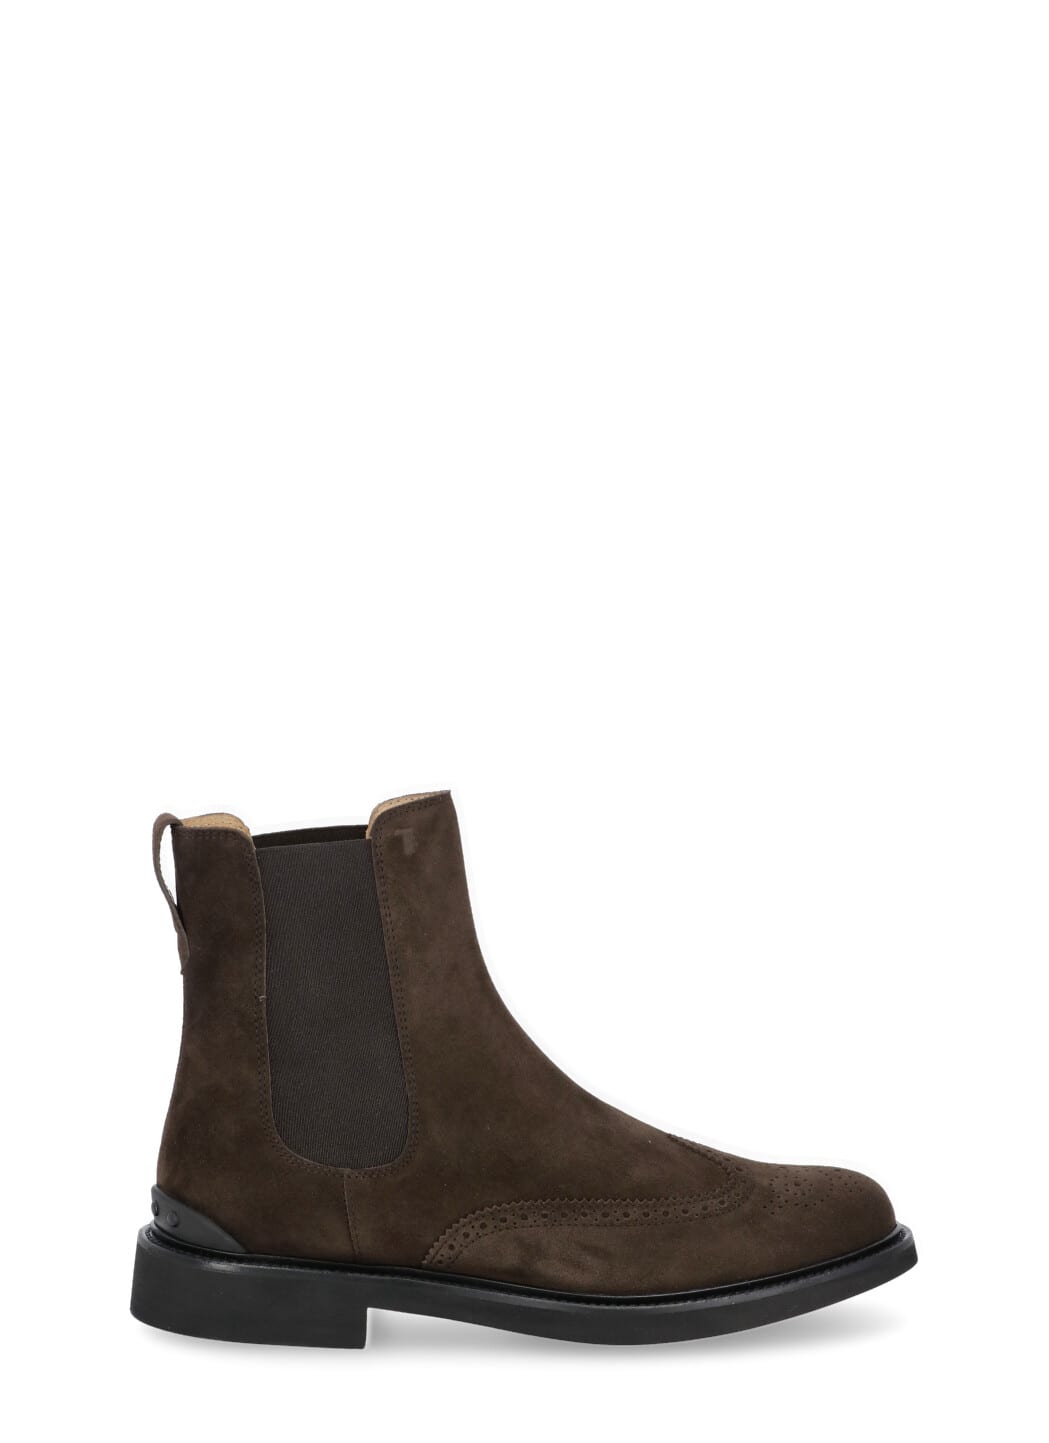 Tod's Suede Leather Boot